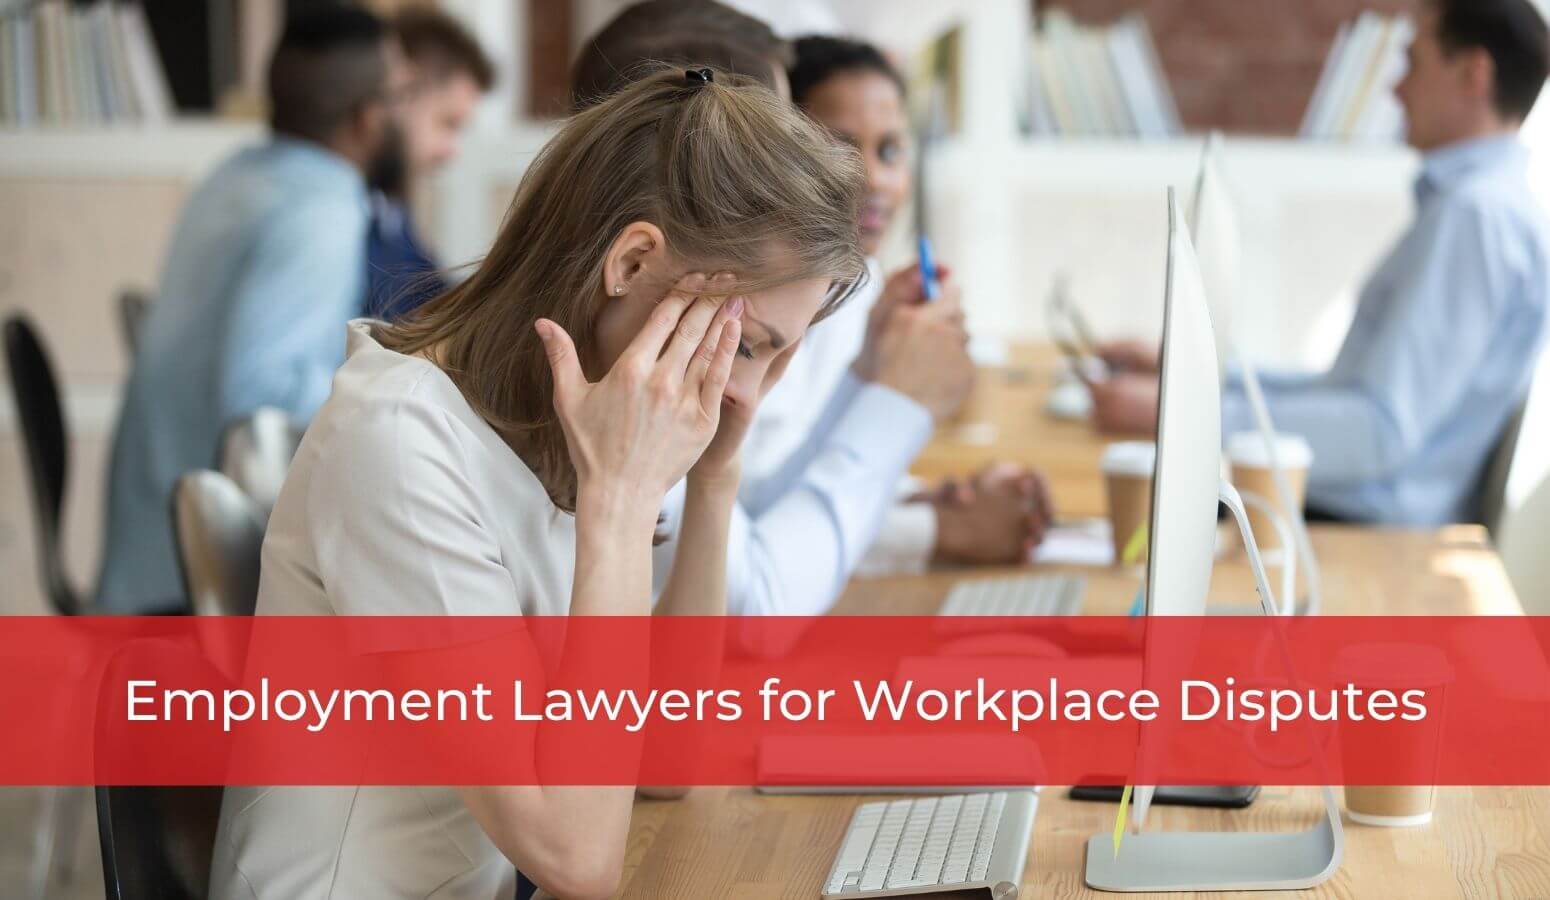 Featured image for “Employment Lawyers for Workplace Disputes”